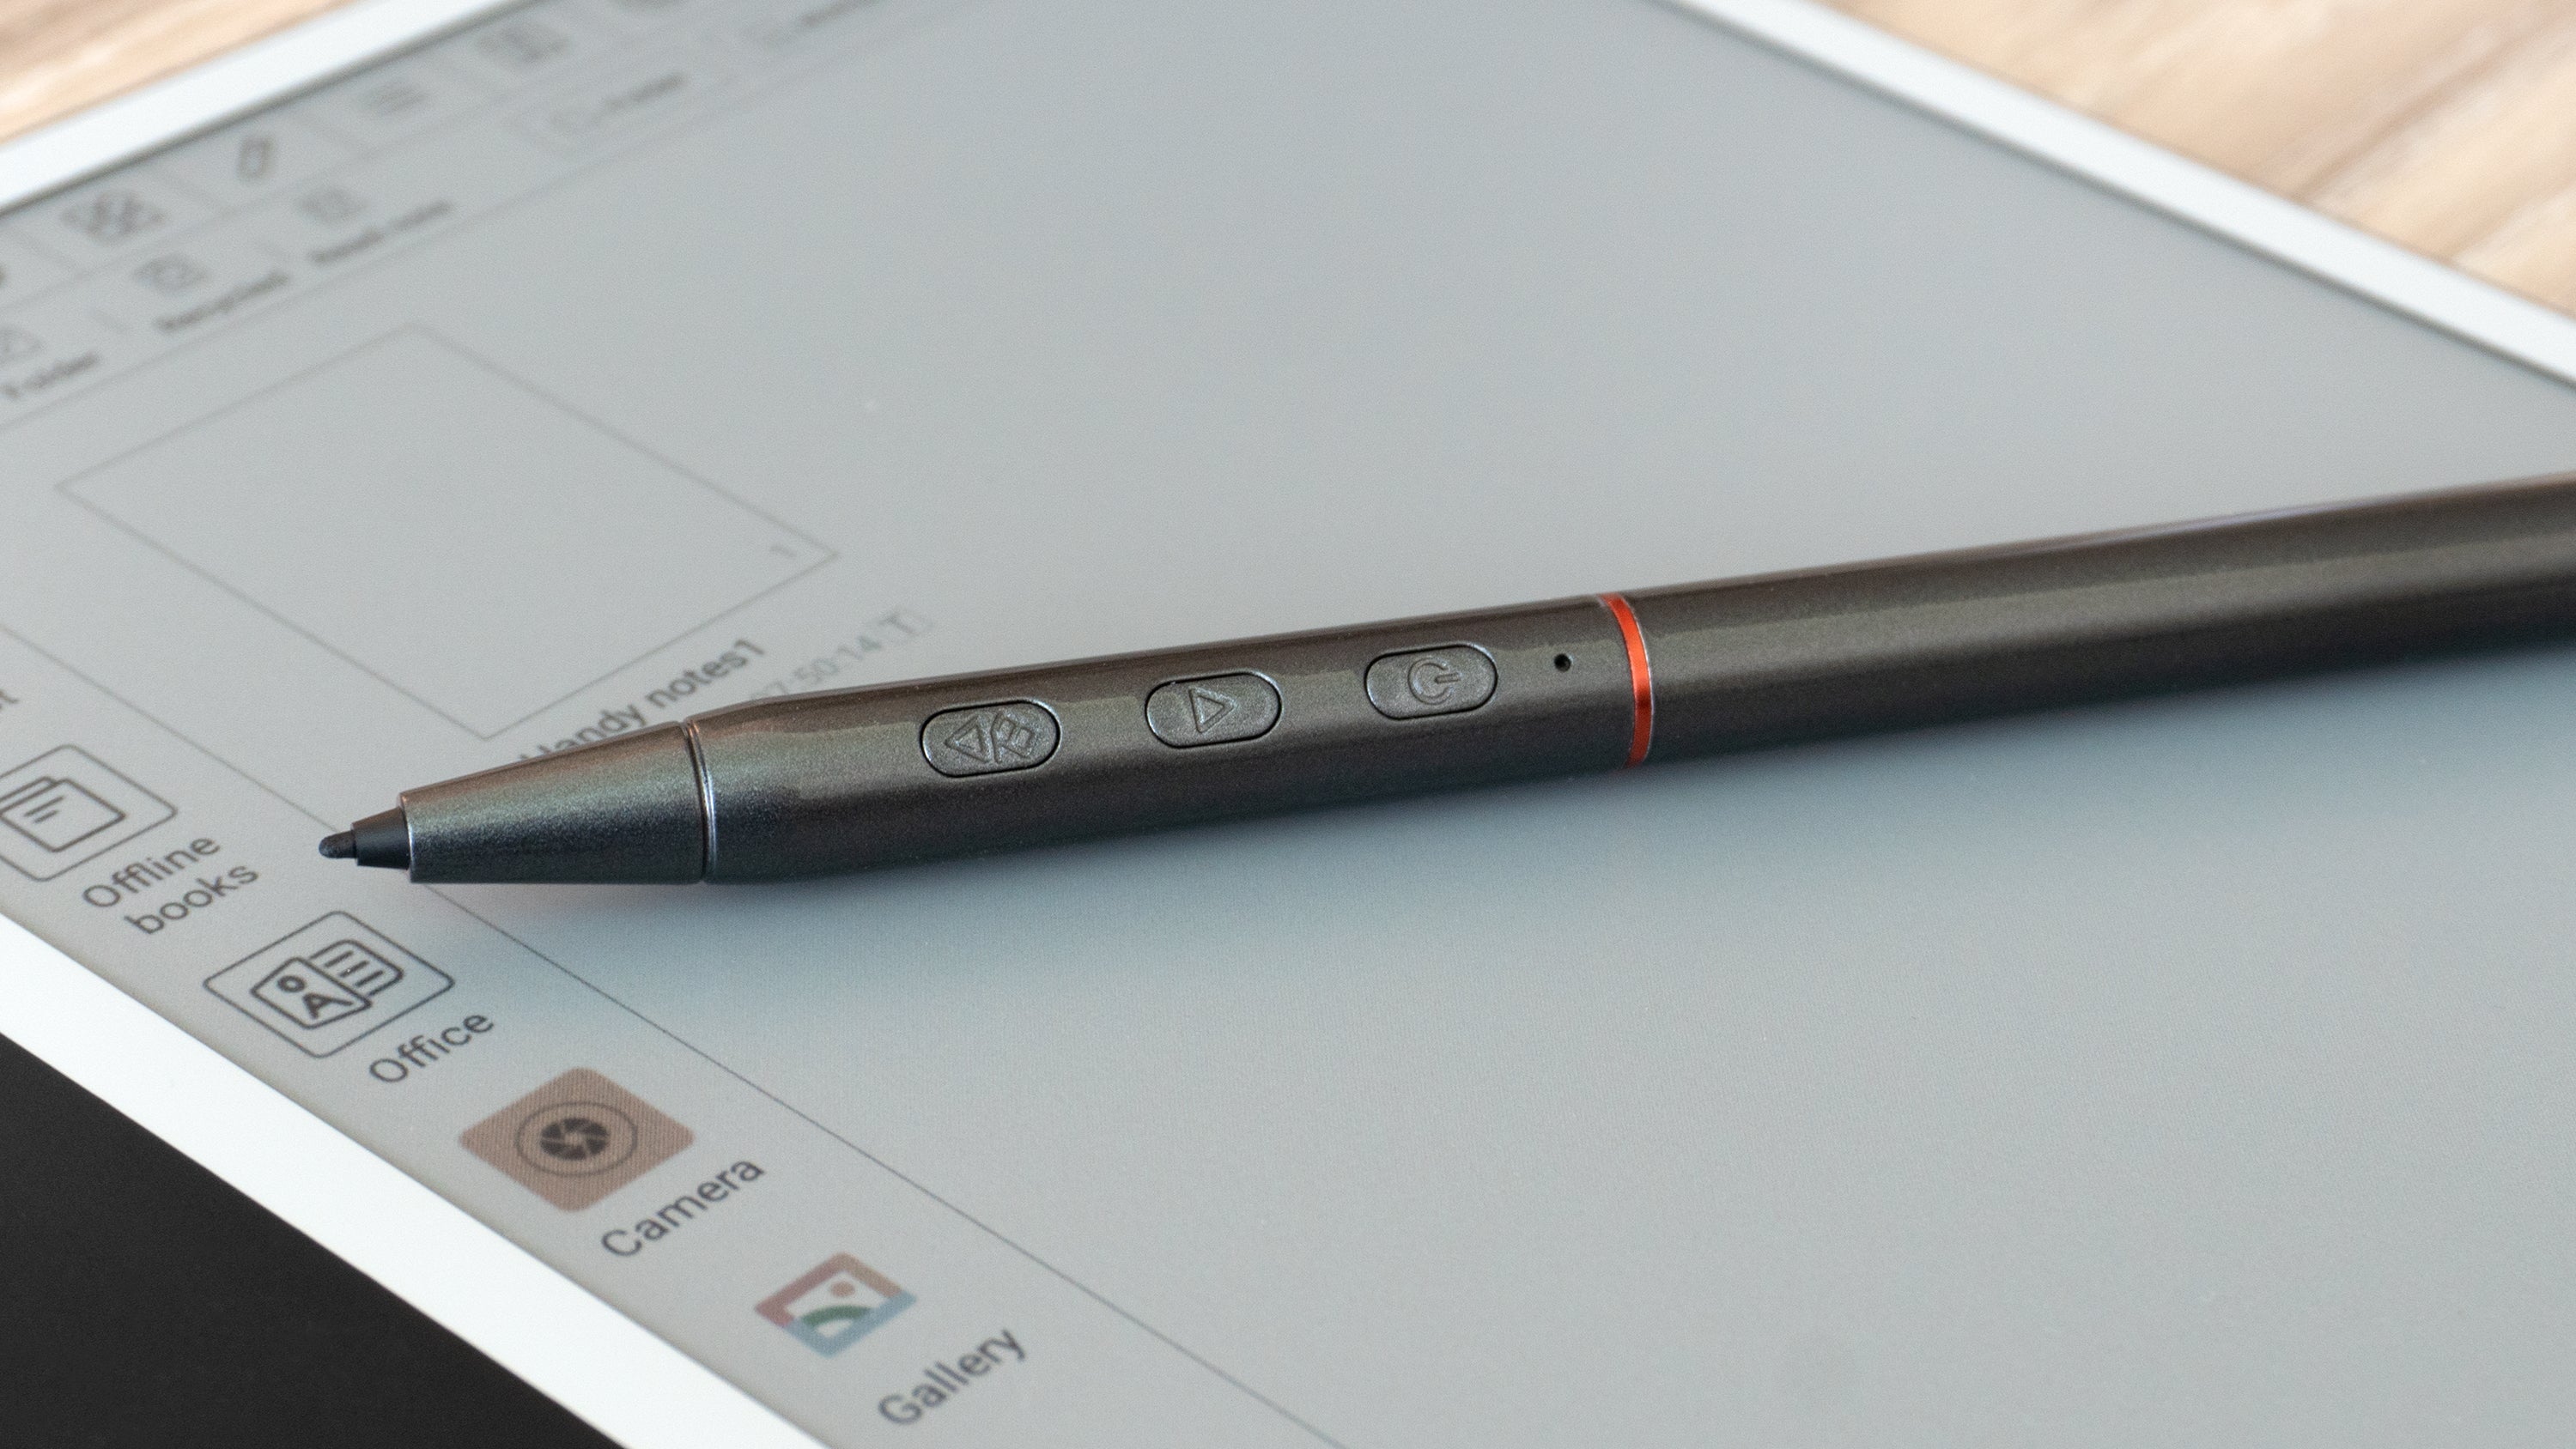 The InkNote Colour's A5 stylus includes useful customisable shortcut buttons. (Photo: Andrew Liszewski | Gizmodo)